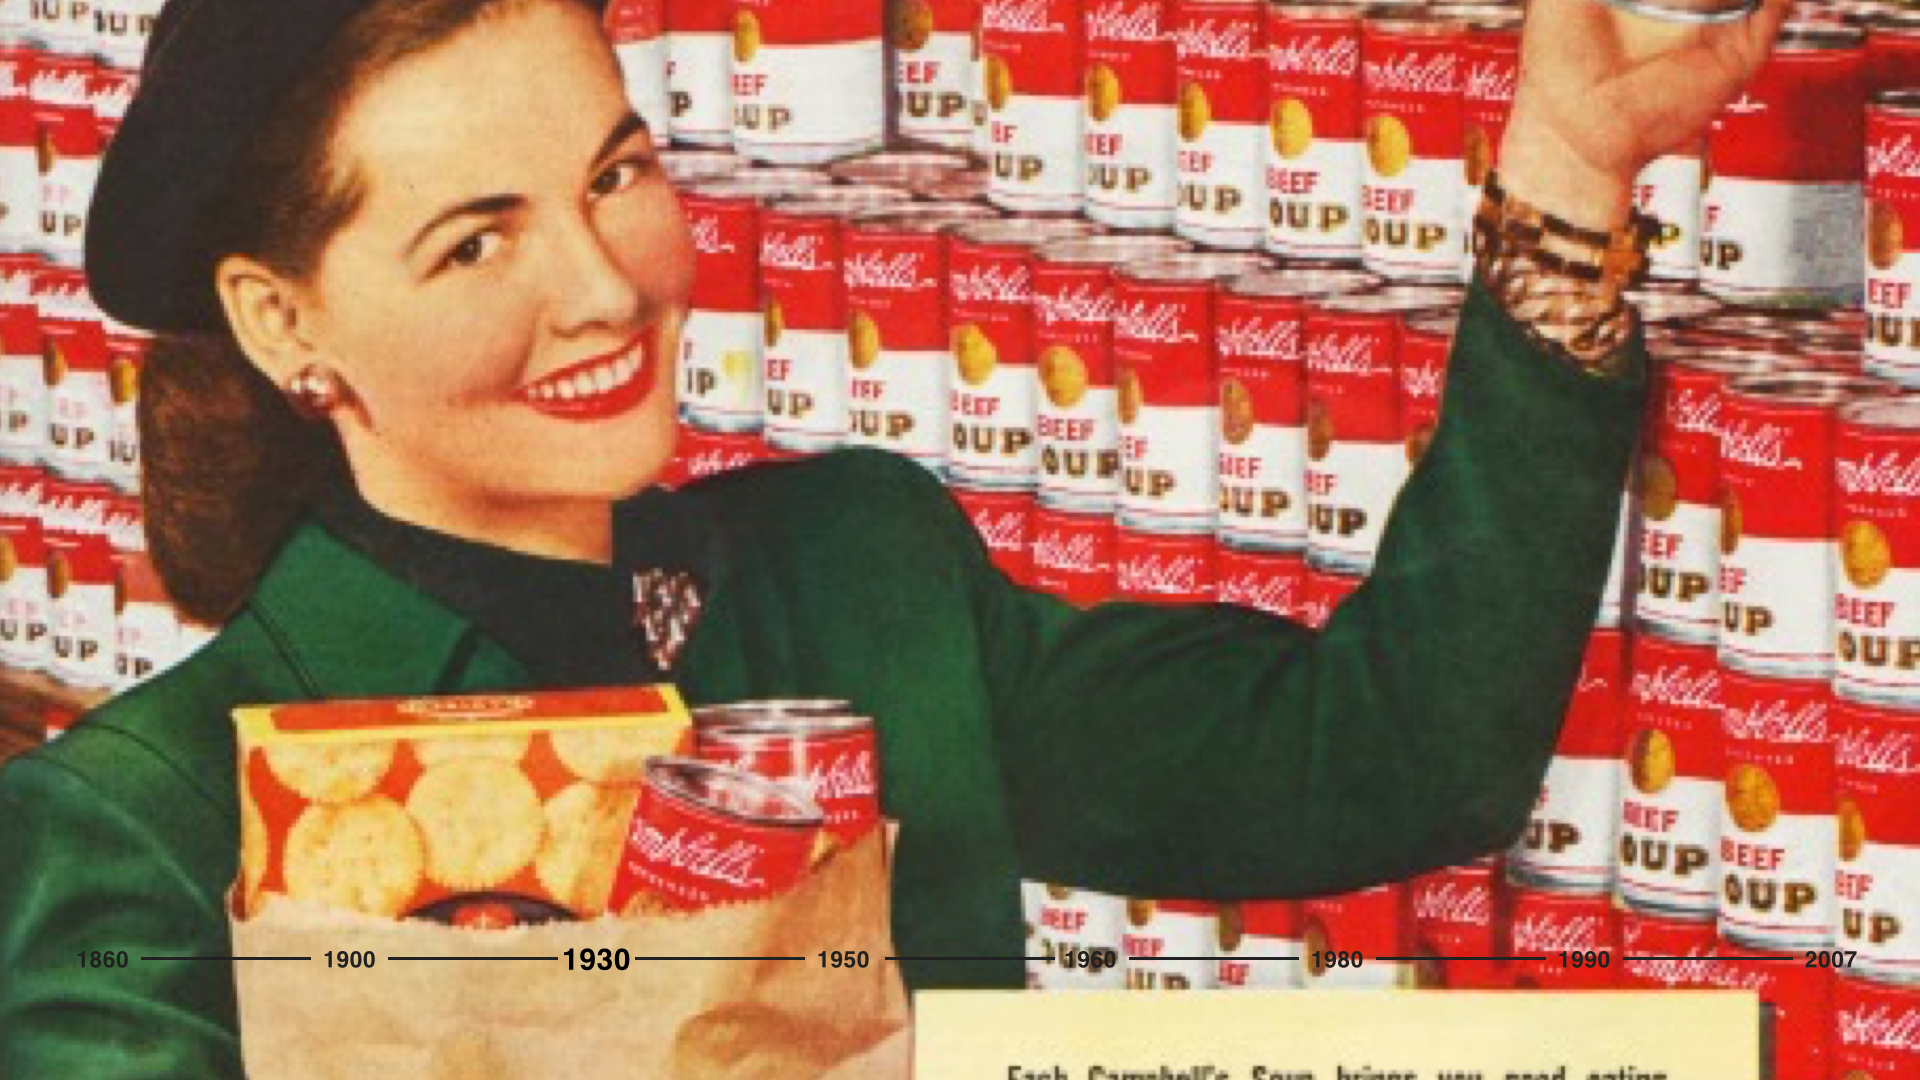  The Big Food brands became nationally recognized and trusted brands. Campbell's sold 16 million cans in a single year, with their condensed soups manufactured at a rate of nearly 40,000 every week. And in 1942, sales topped $100 million for the firs